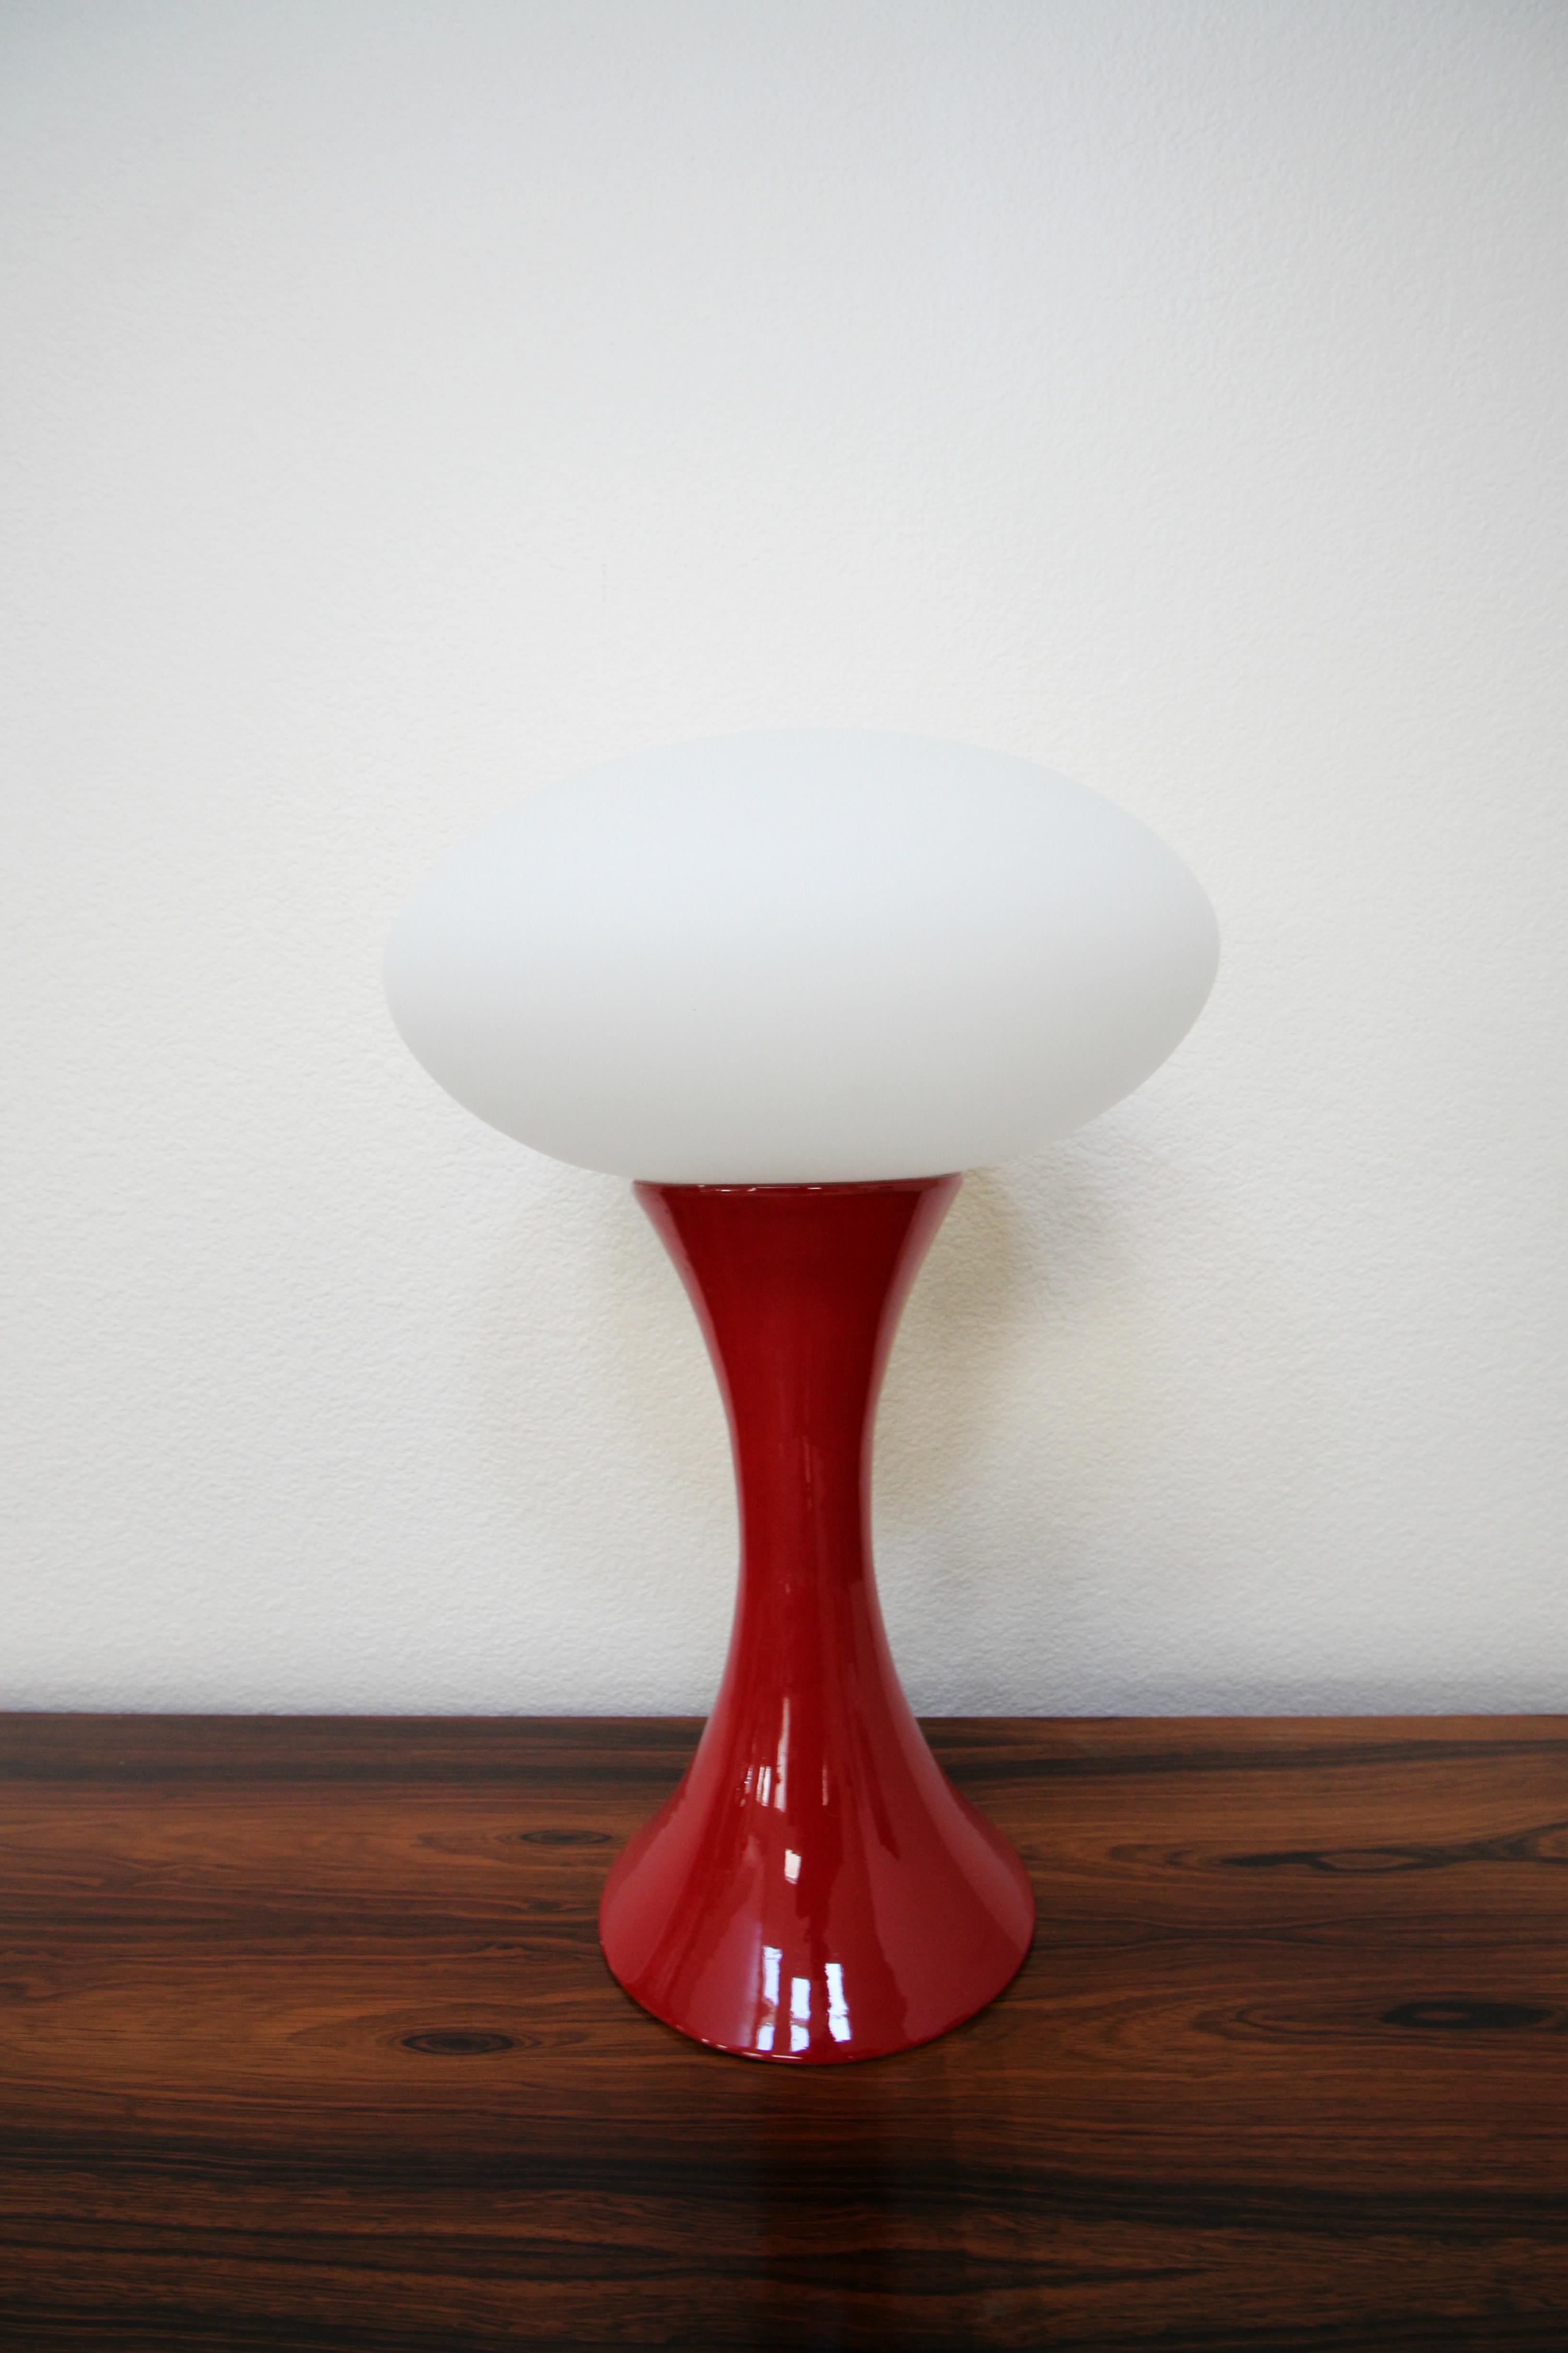 Gorgeous Italian ceramic and porcelain table lamp. Finished in a high gloss red and topped with a Classic Laurel Lamp Company style shade, this beauty is a real show stopper.

Dimensions: Overall: 20.25